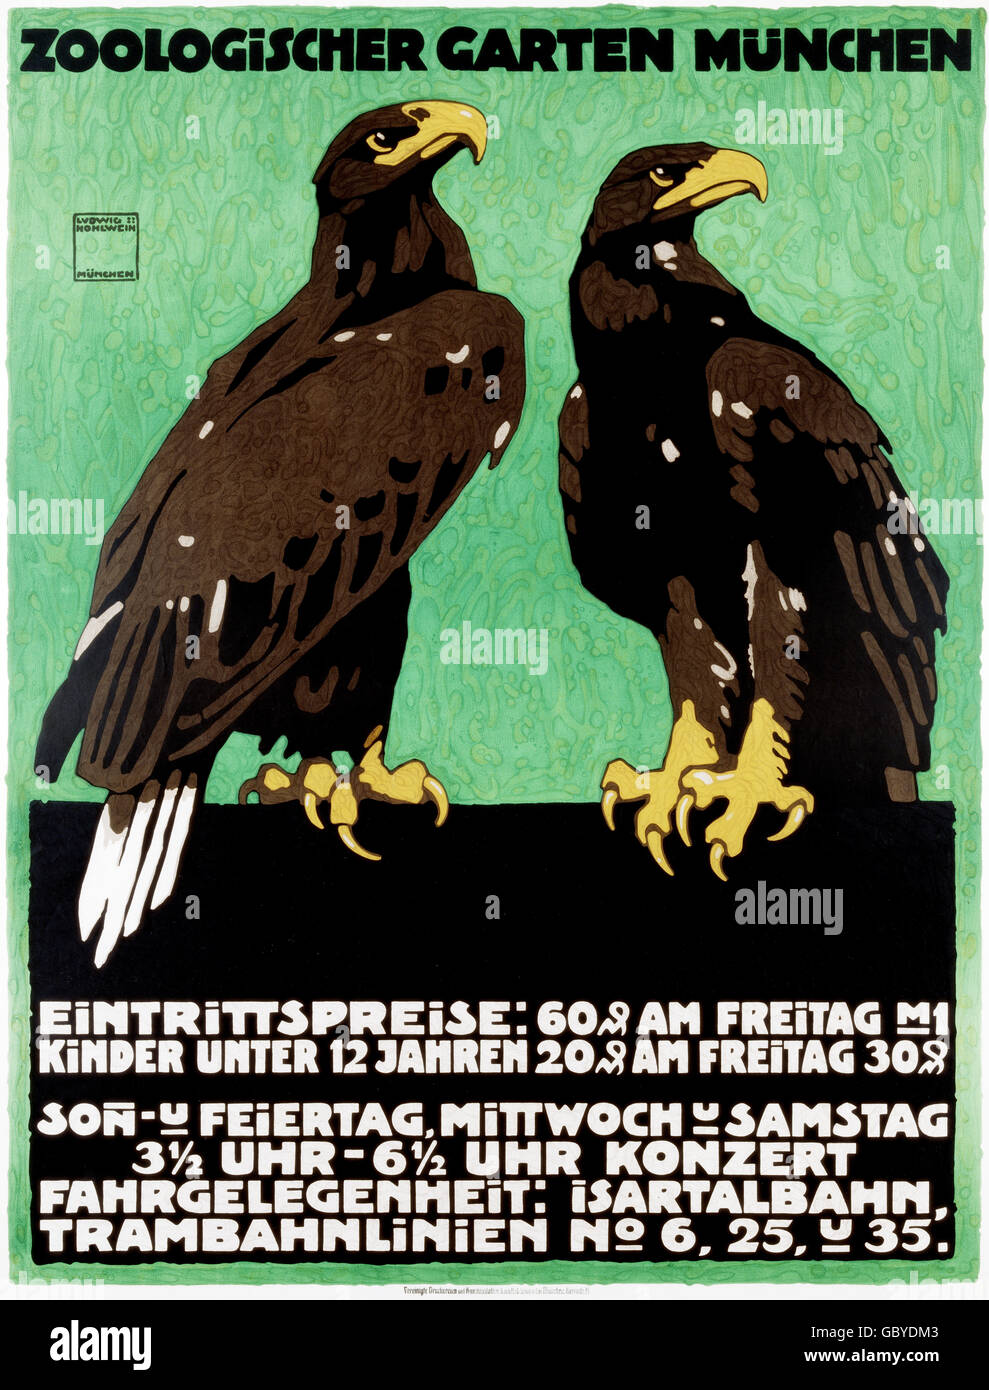 advertising, Hohlwein, Ludwig, poster, Munich Zoological Garden, 1912, Additional-Rights-Clearences-Not Available Stock Photo